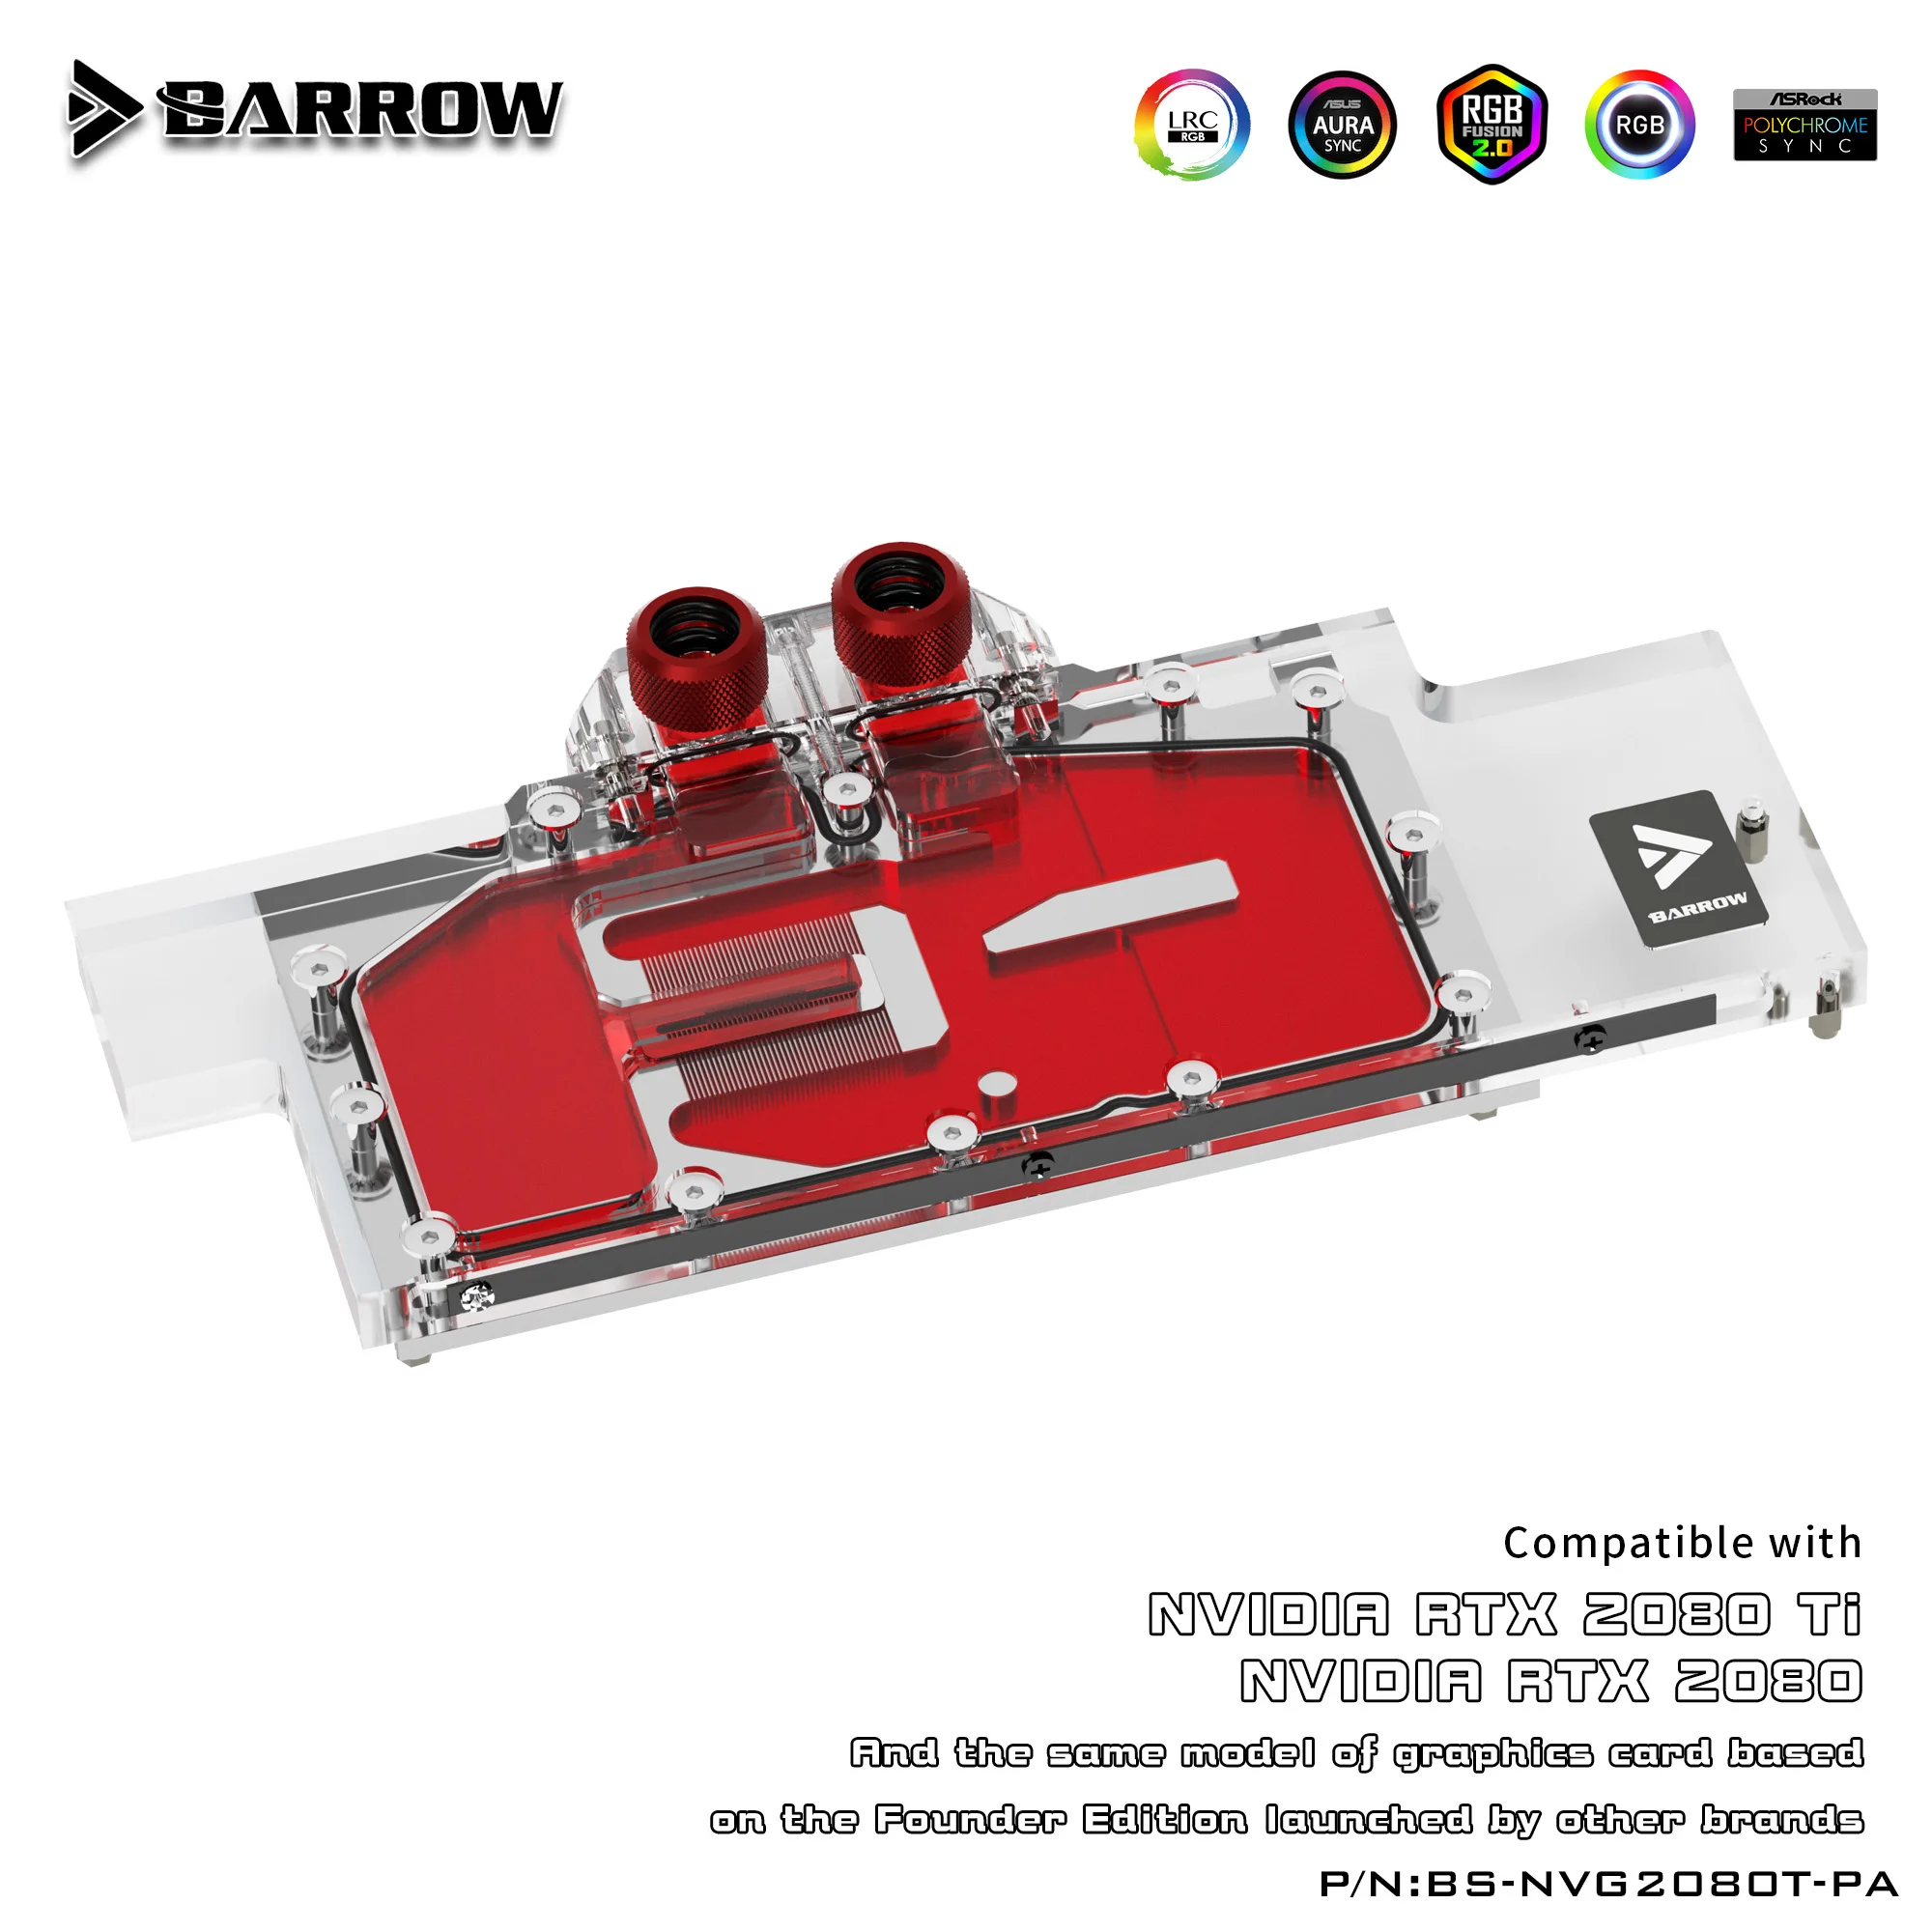 Barrow 2080ti 2080 GPU Water Cooling Block, Full Cooler, For Founder Edition Nvidia RTX2080Ti/2080, BS-NVG2080T-PA